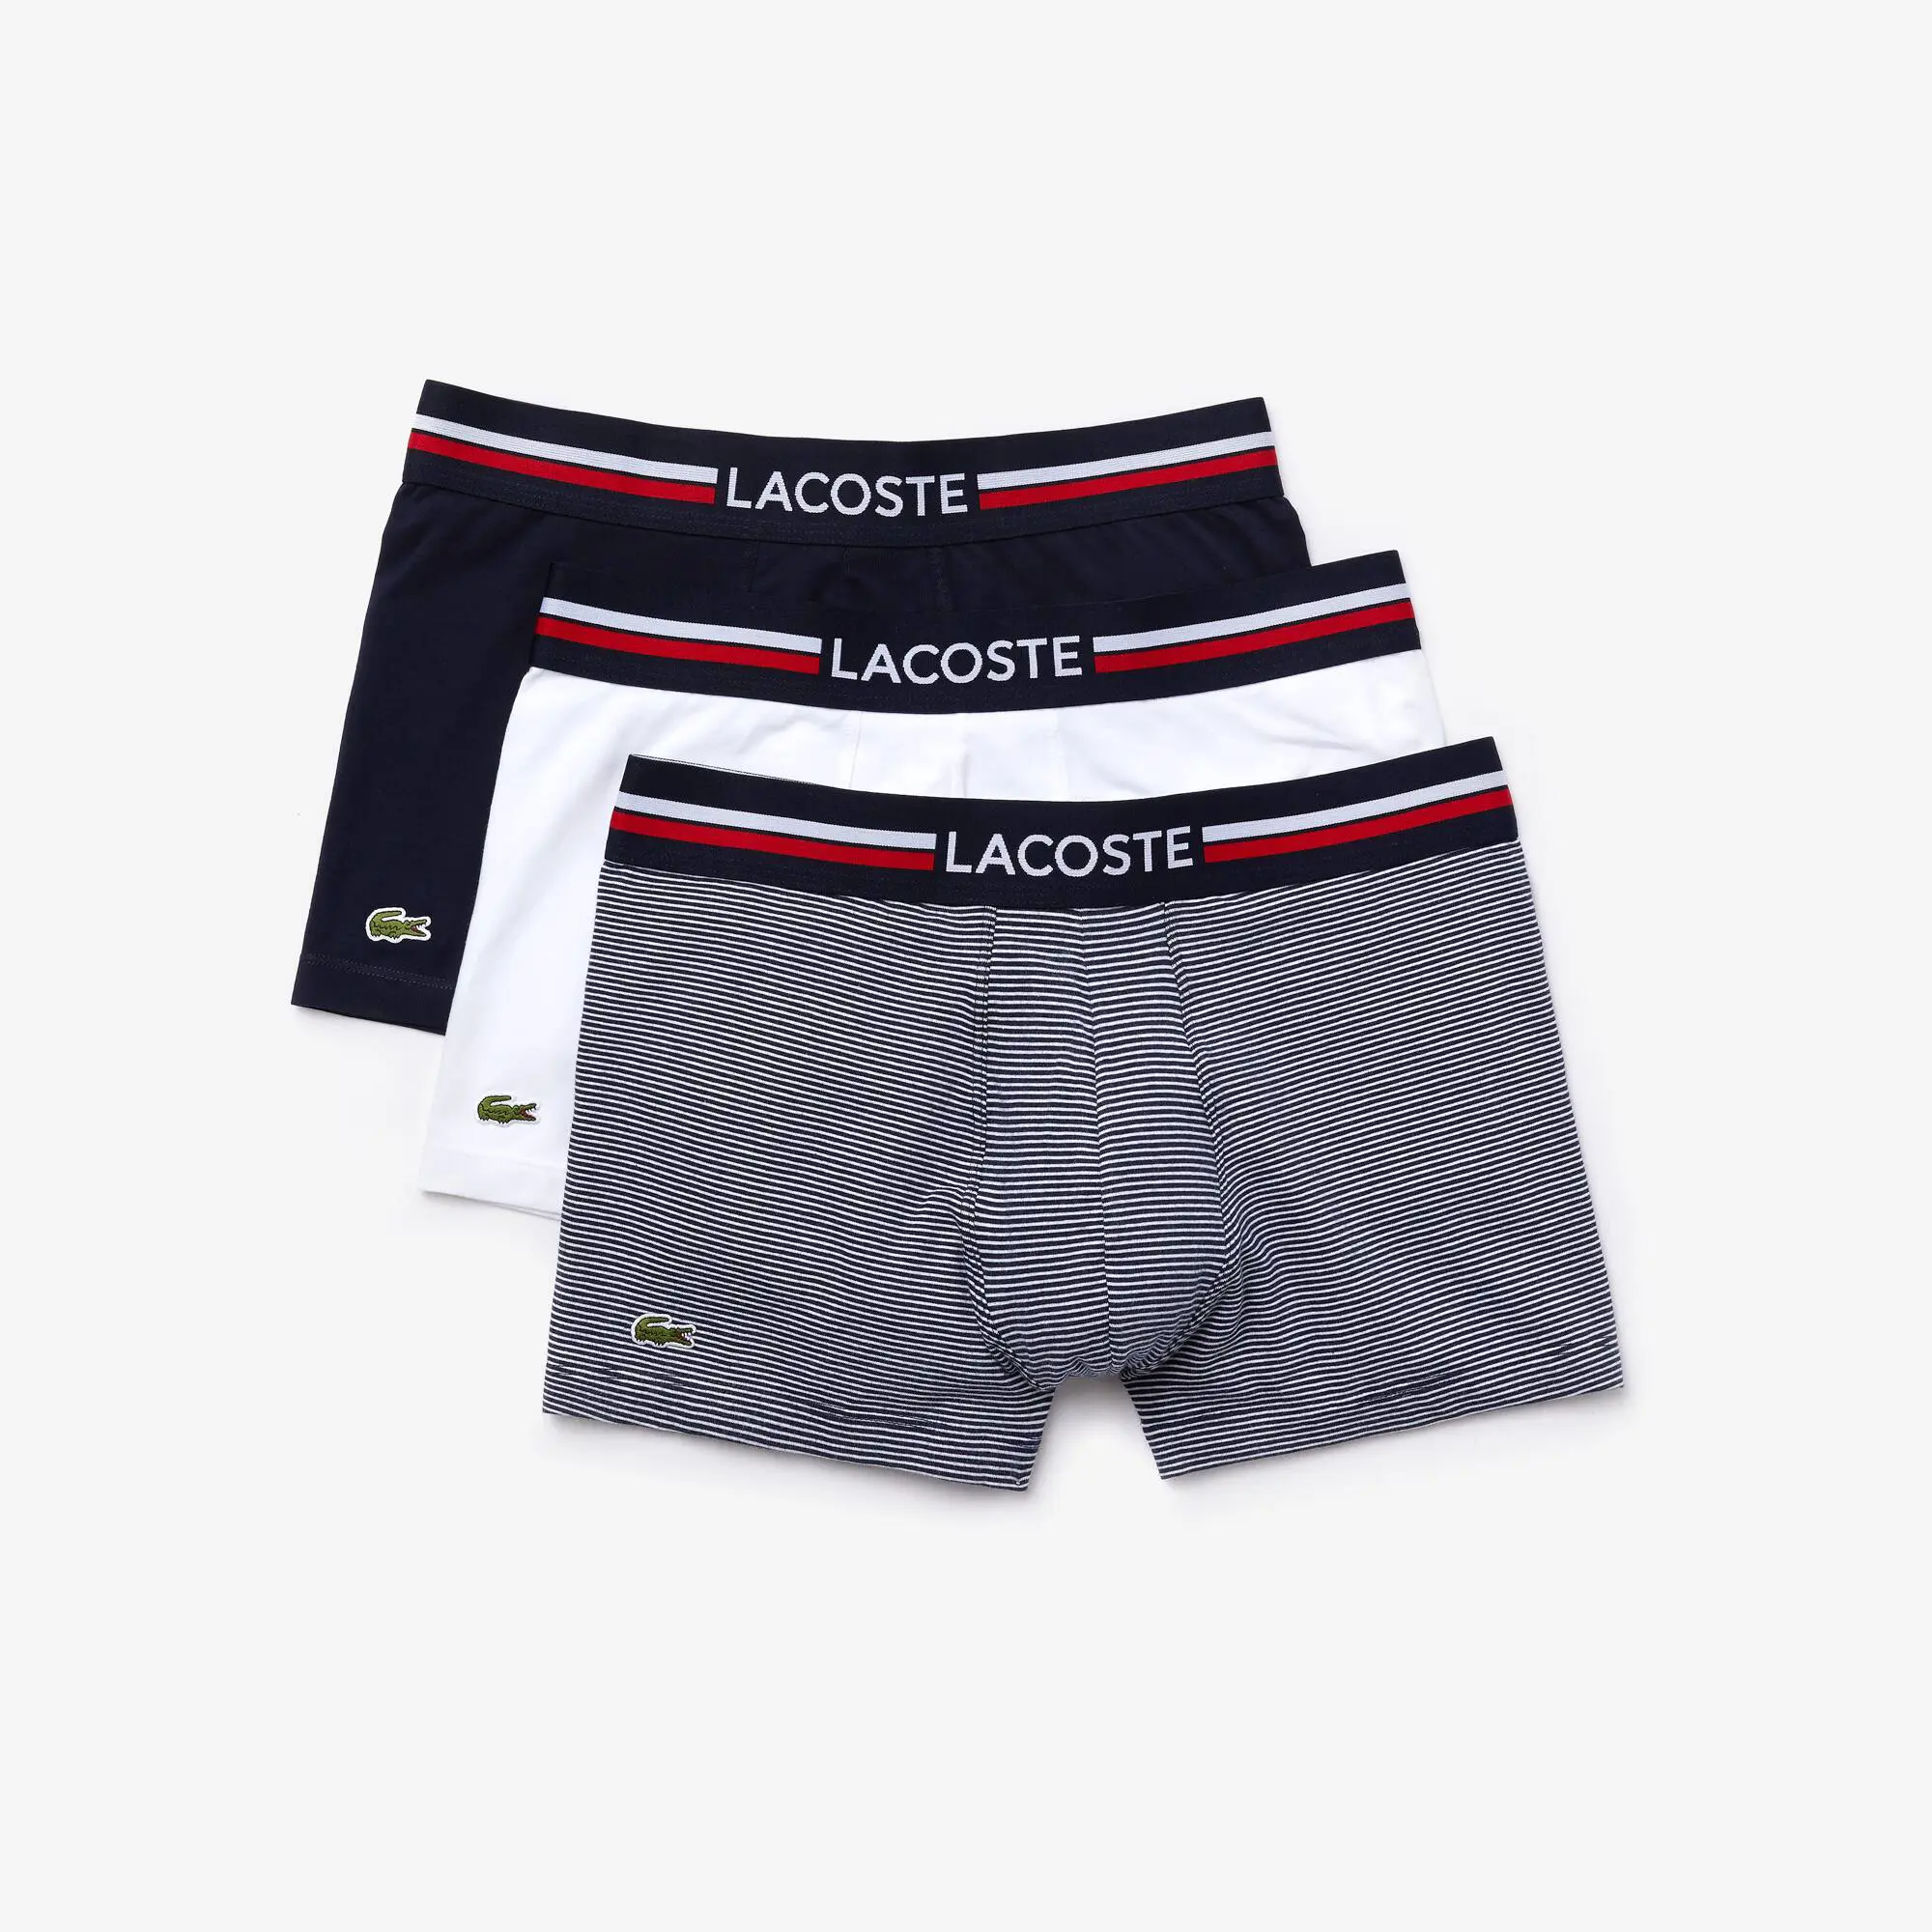 Lacoste Men's 3-Pack Iconic Boxer Briefs With Multicolor Waistband. 2